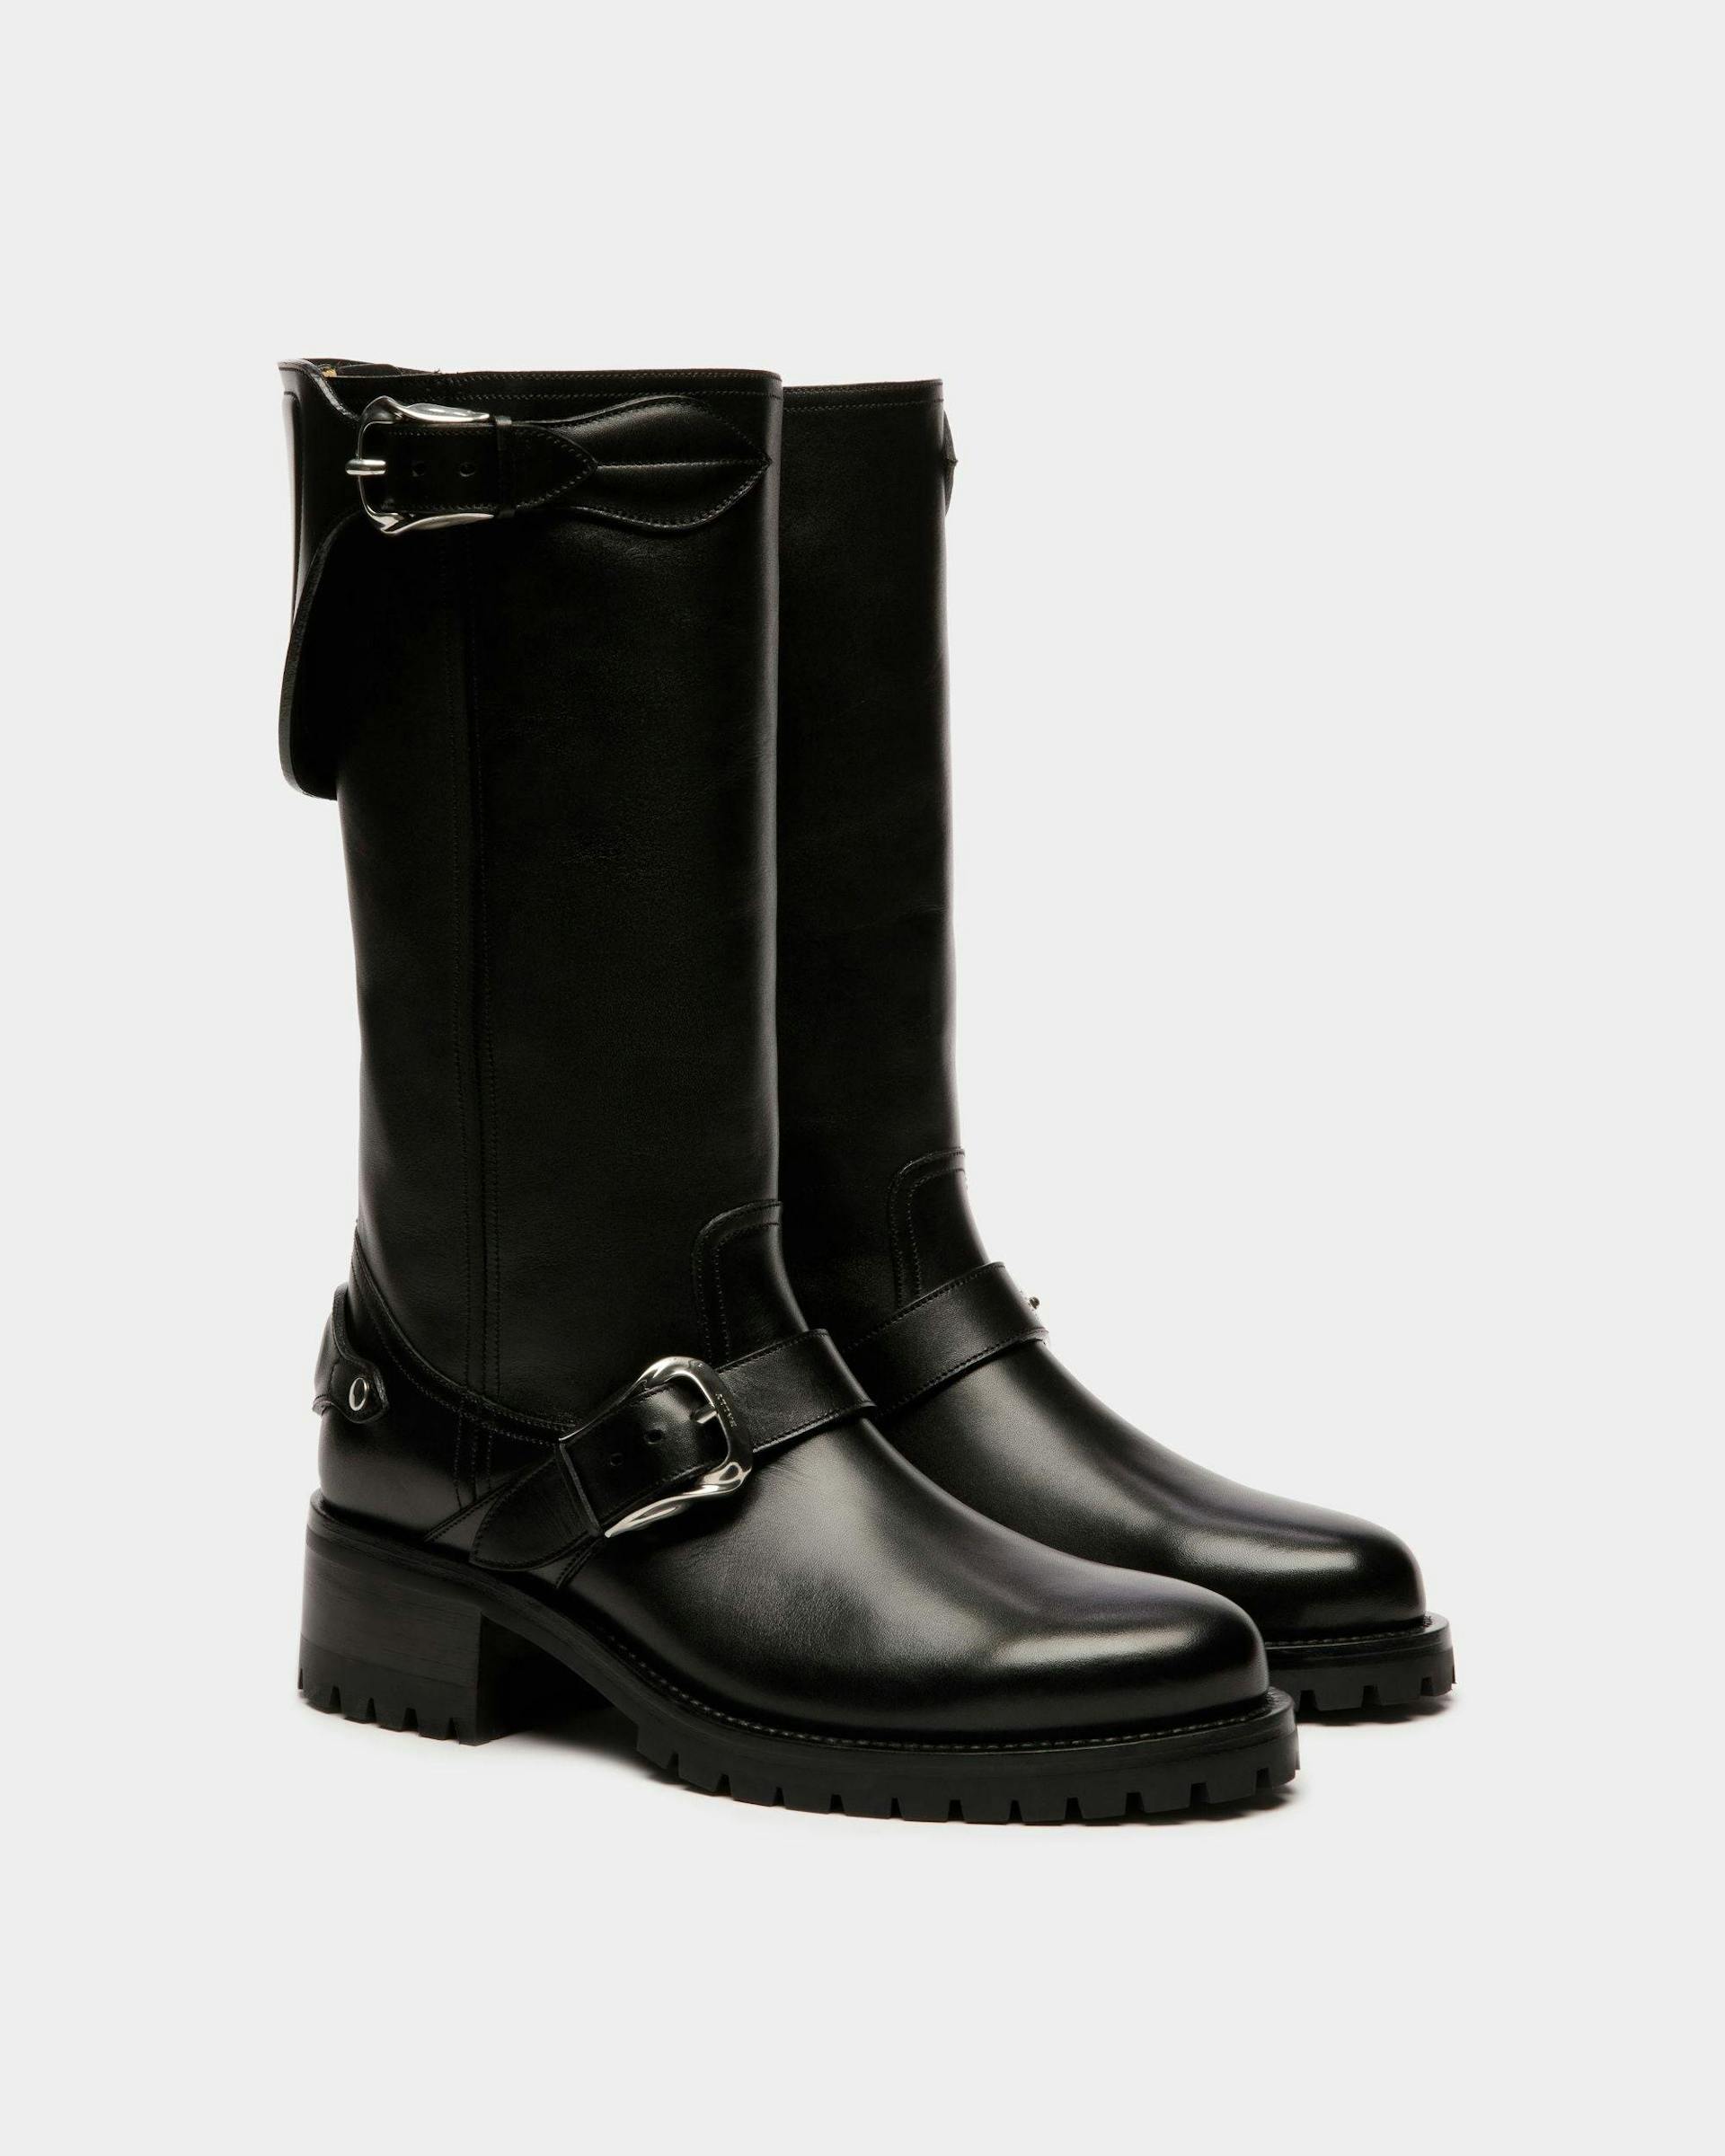 Women's Ardis Long Boots In Black Leather | Bally | Still Life 3/4 Front